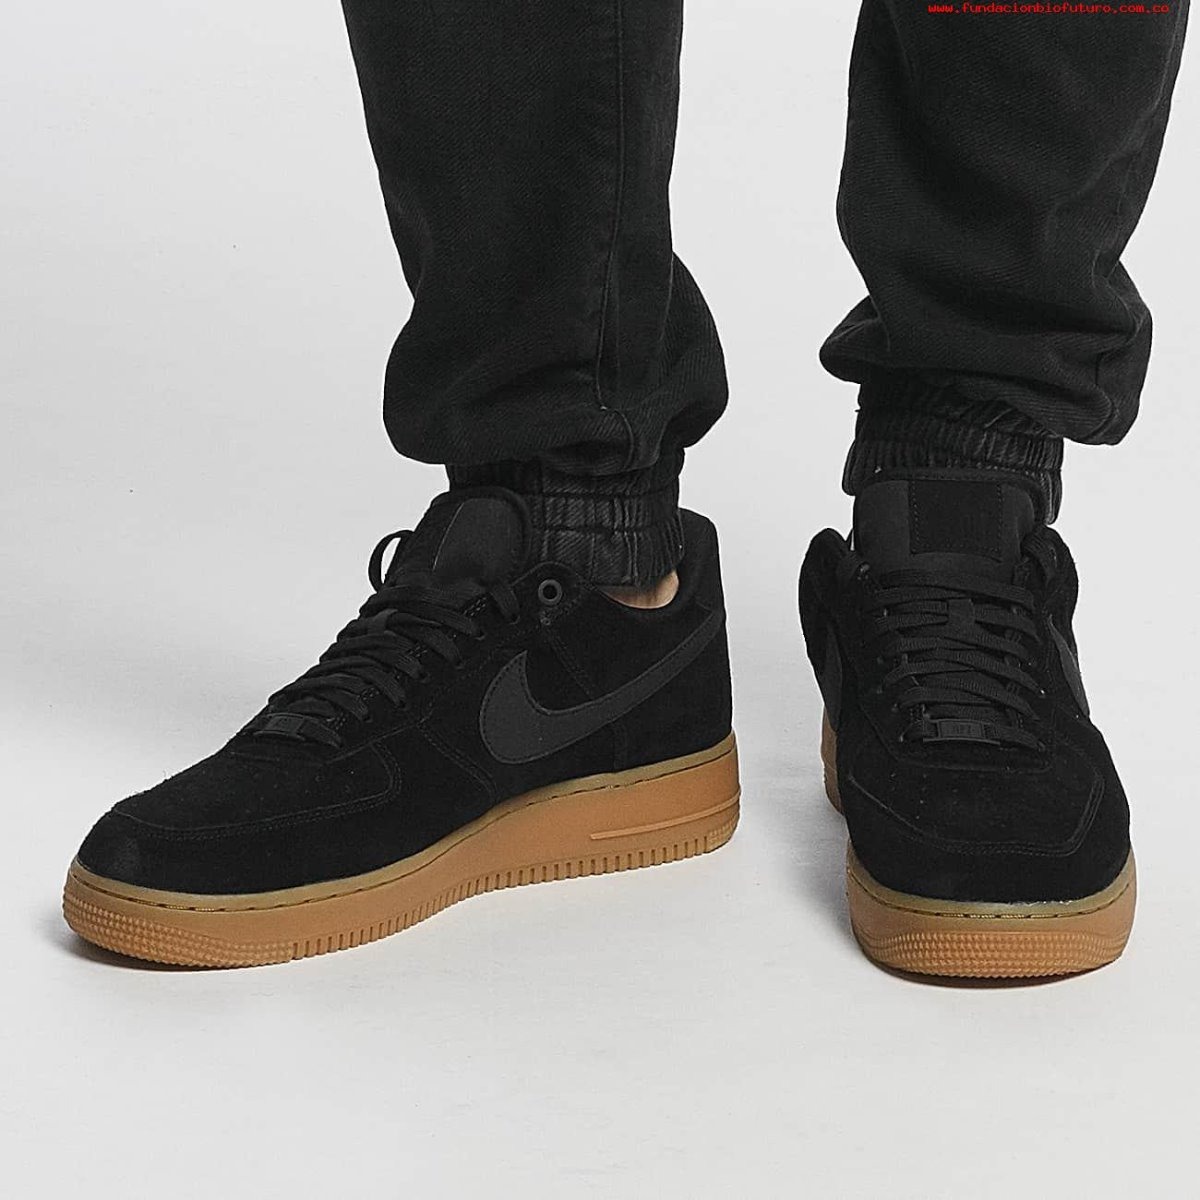 nike force one negros